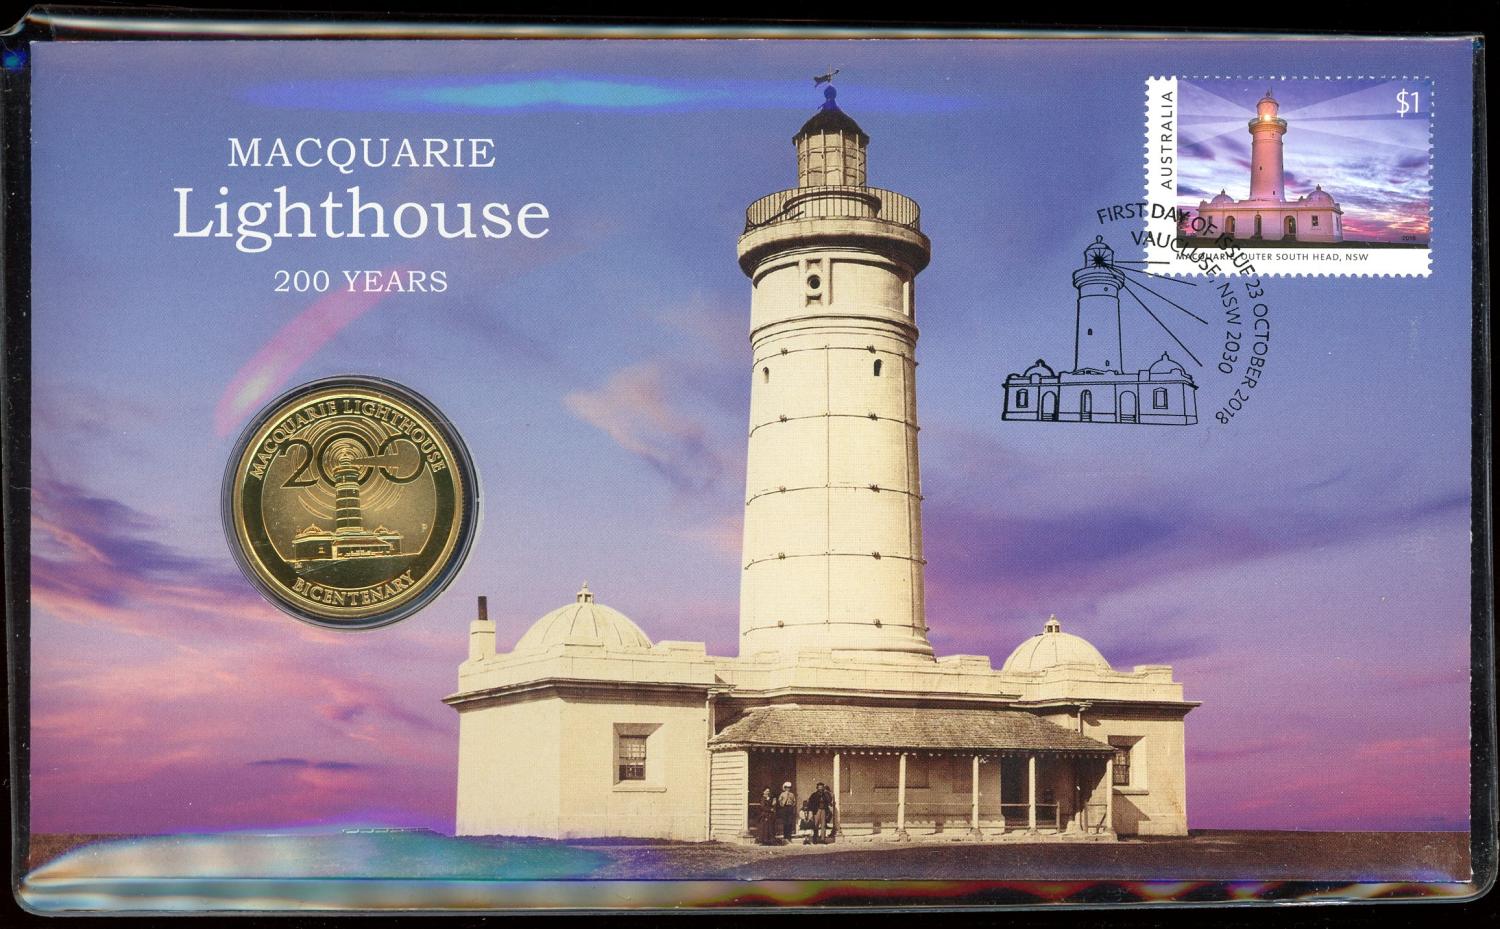 Thumbnail for 2018 Issue 27 Macquarie Lighthouse 200 Years PNC